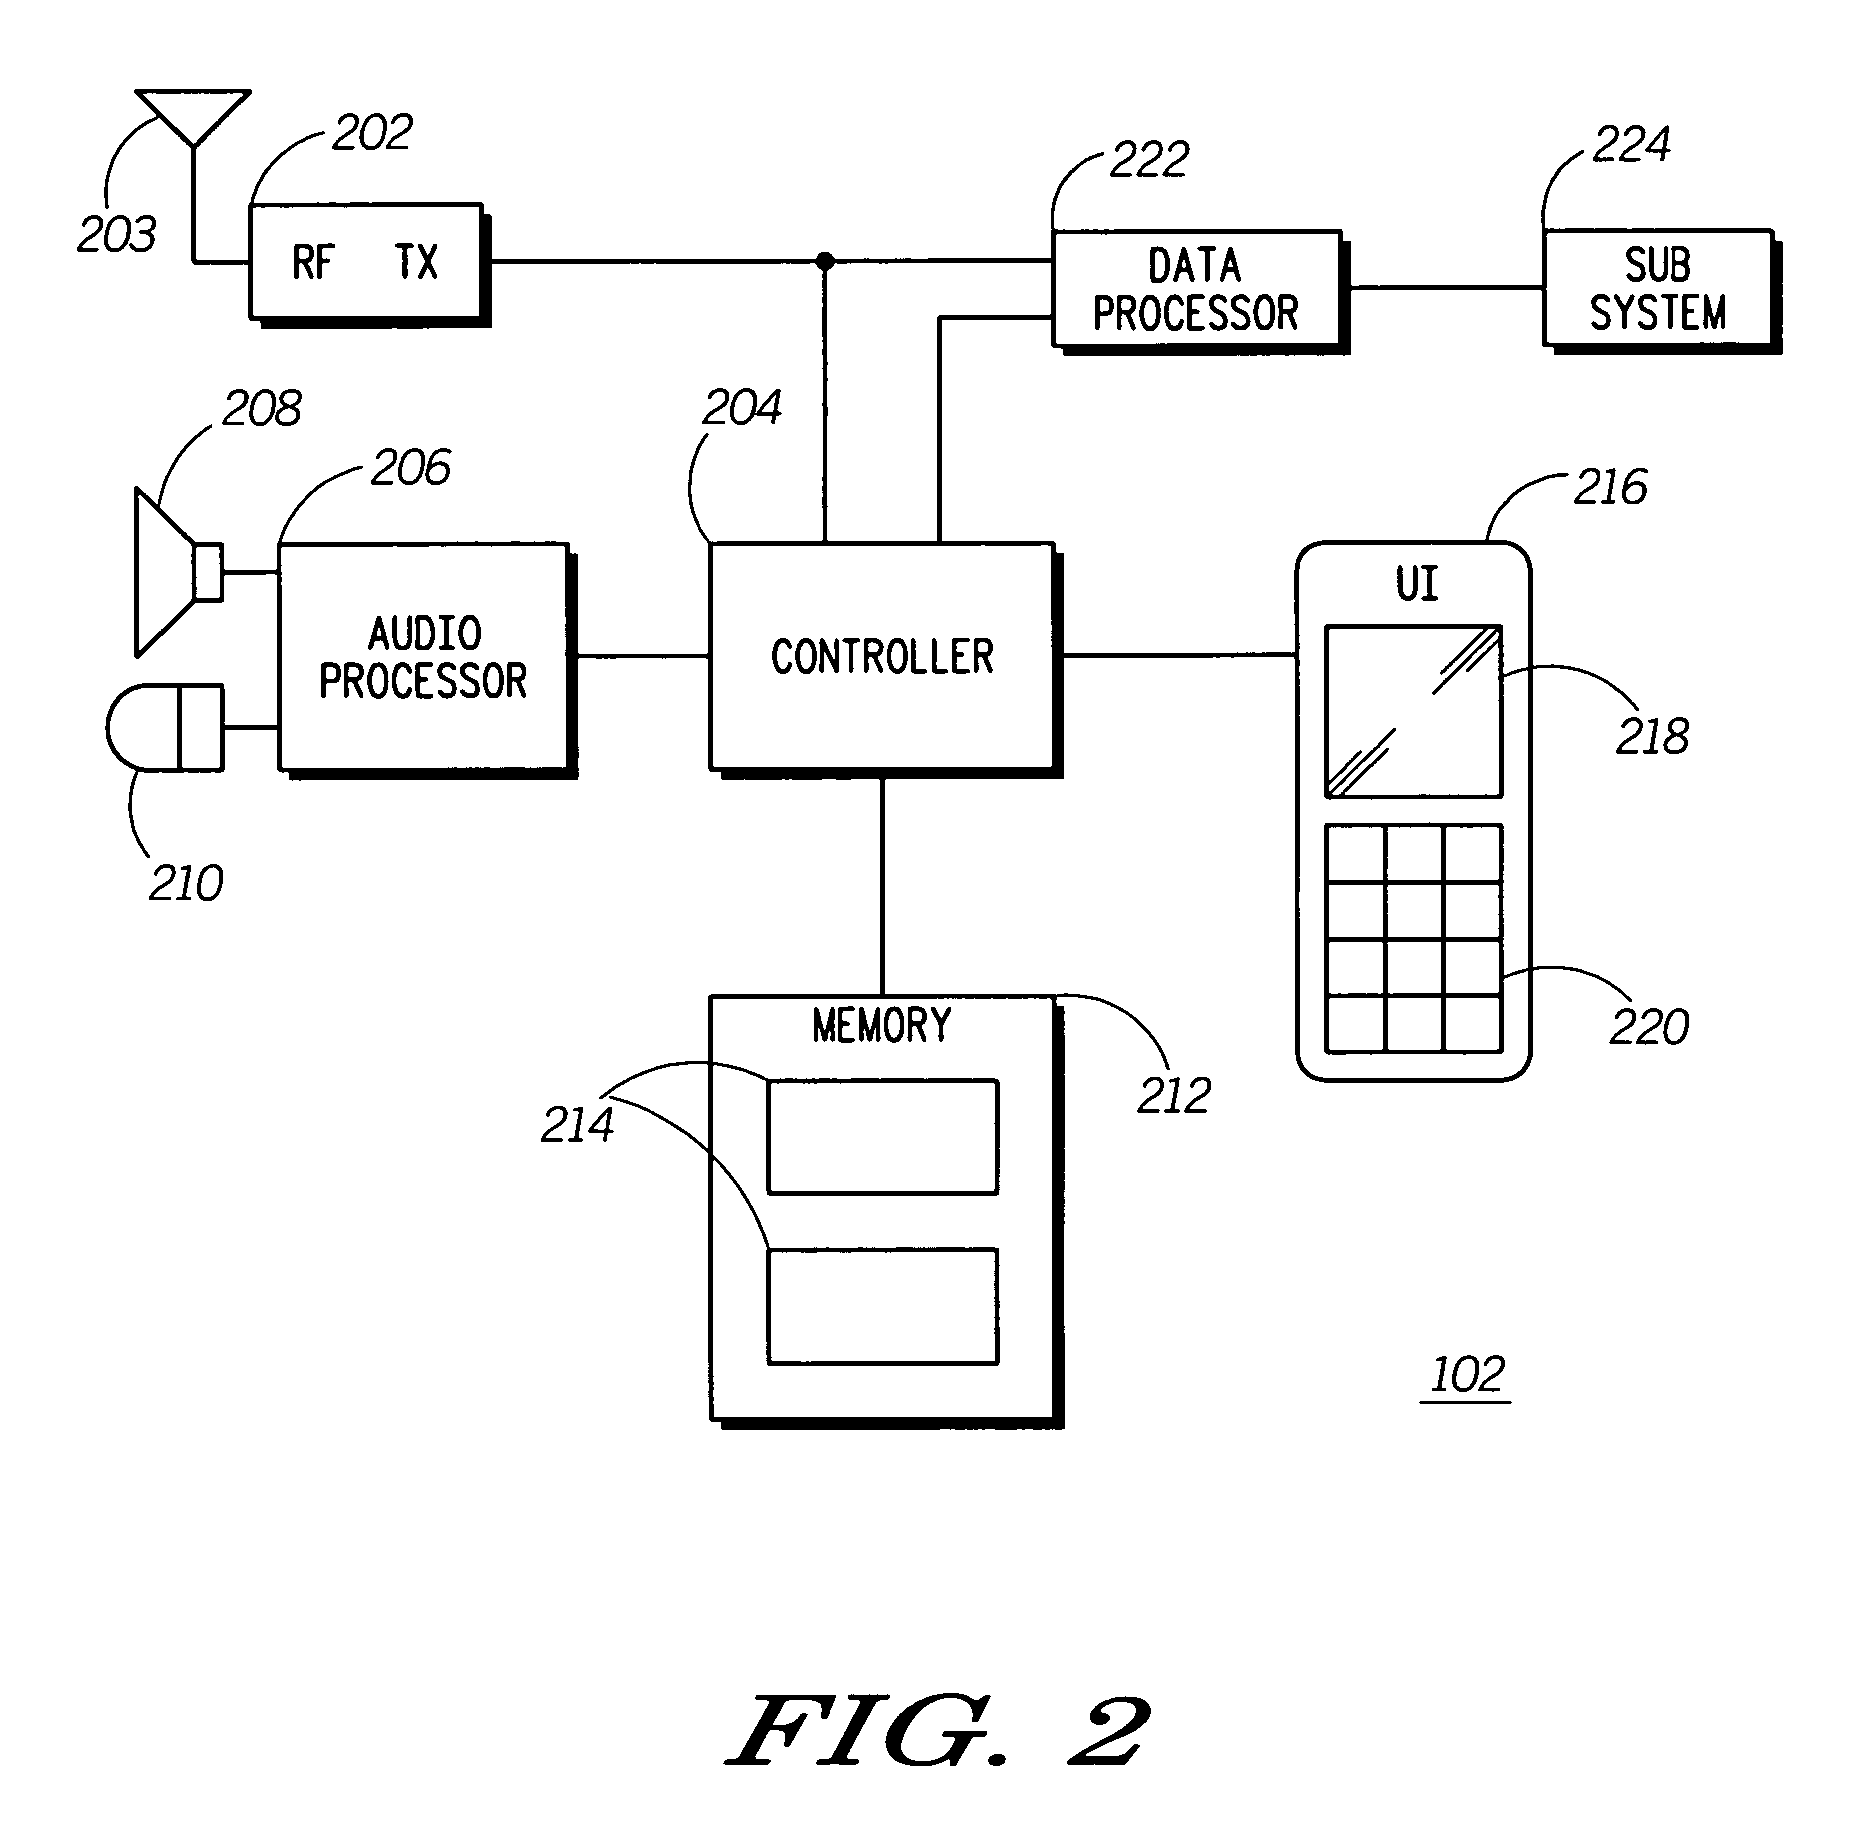 Method and system for manipulating a shared object